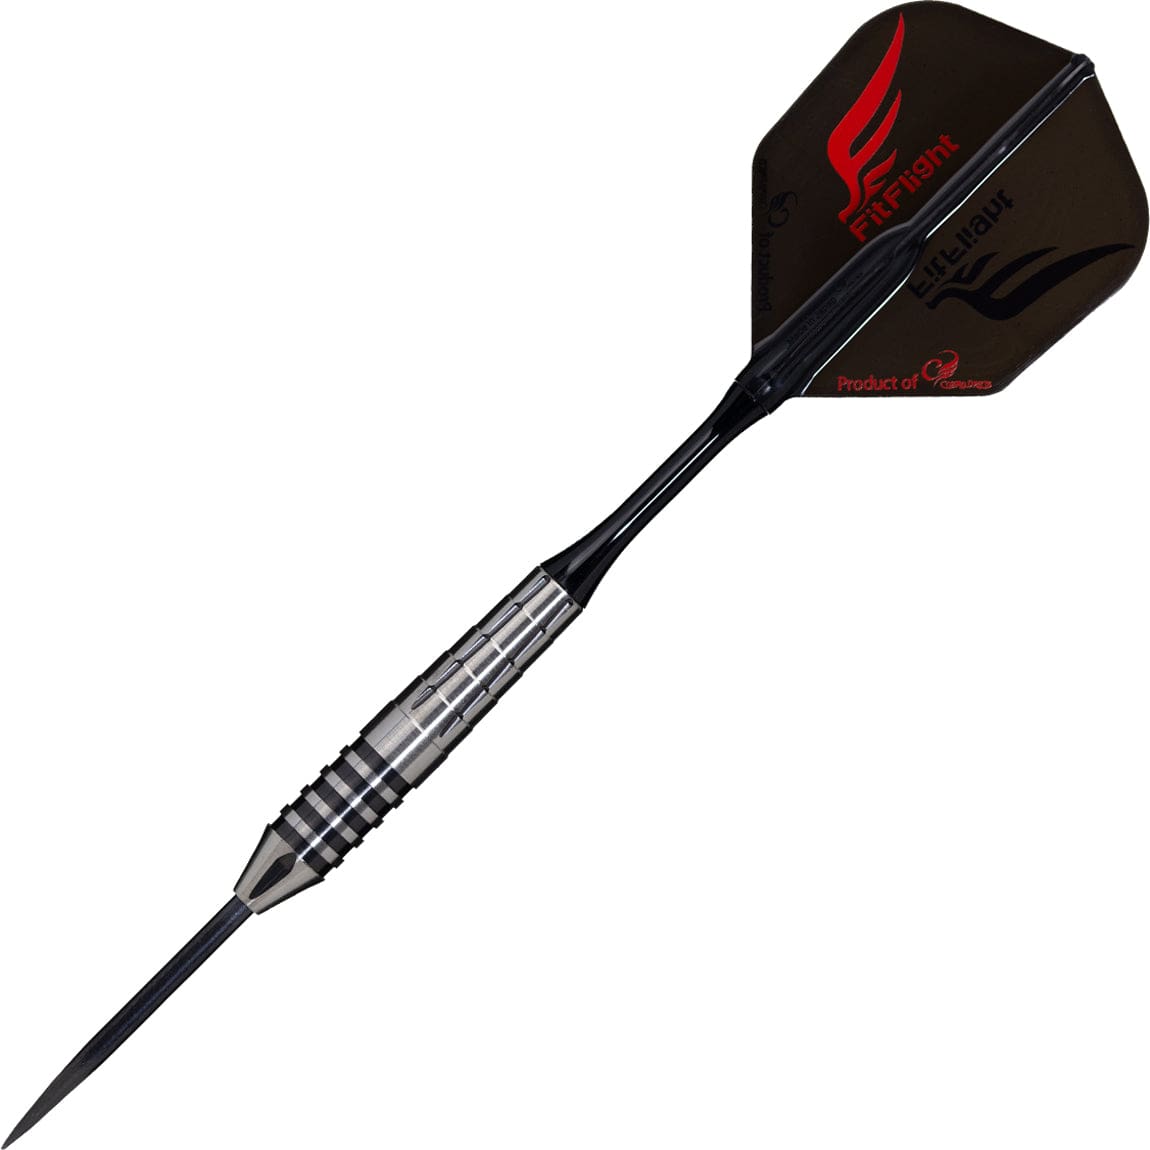 Cosmo Darts - Discovery Label - Steel Tip - Jose Justicia Perales v2 20g